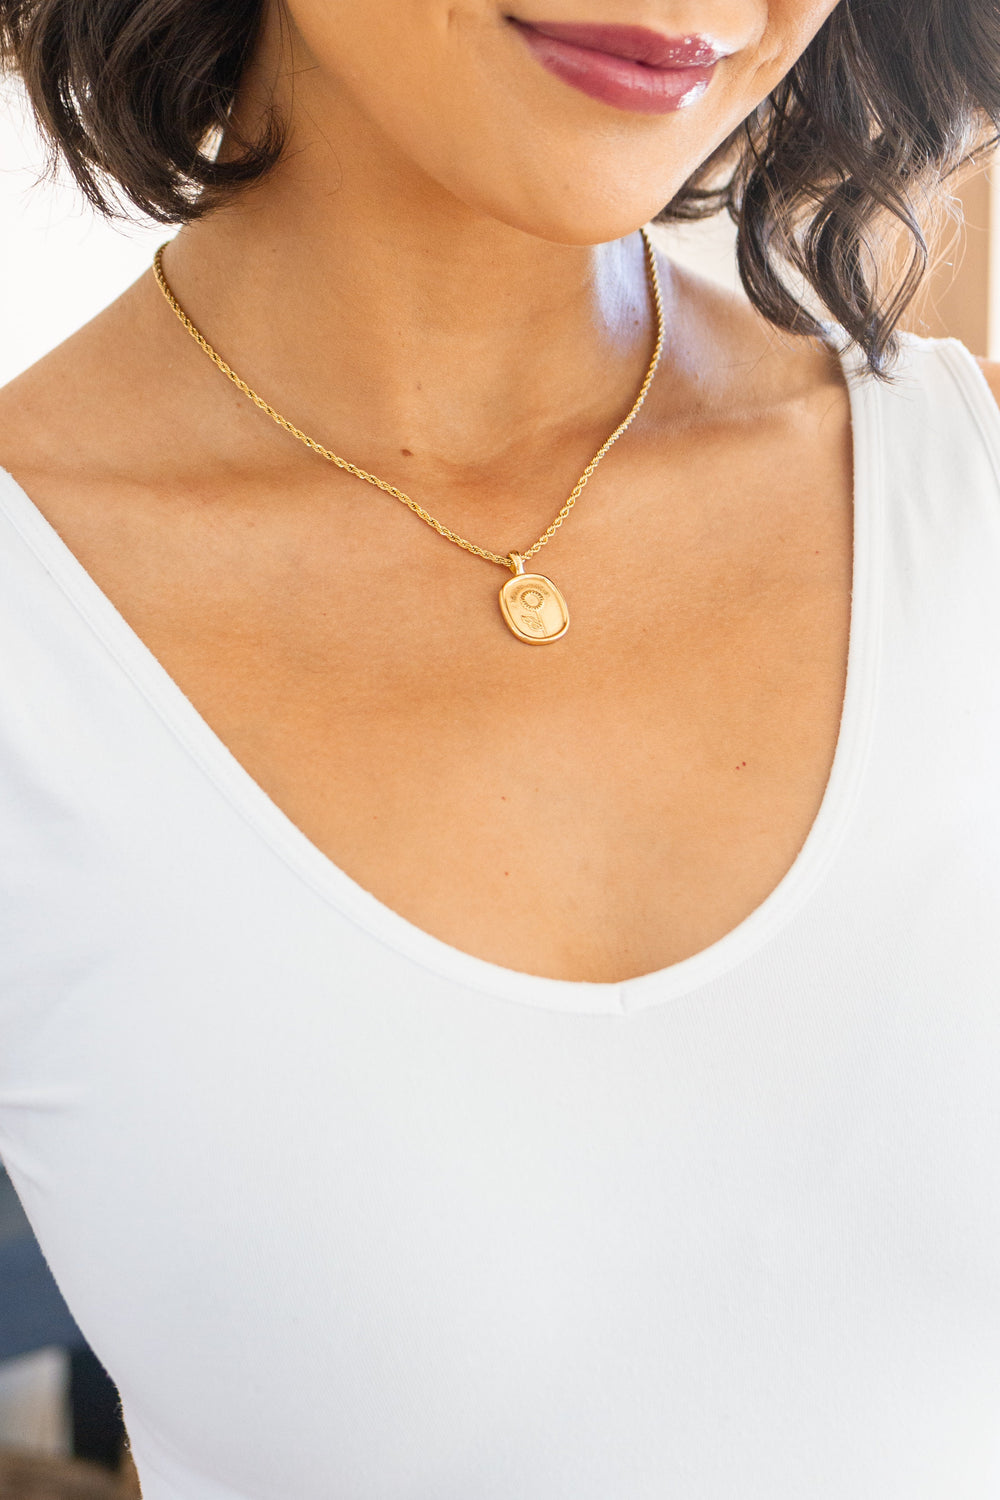 Simple Sunflower Pendent Necklace - Cheeky Chic Boutique